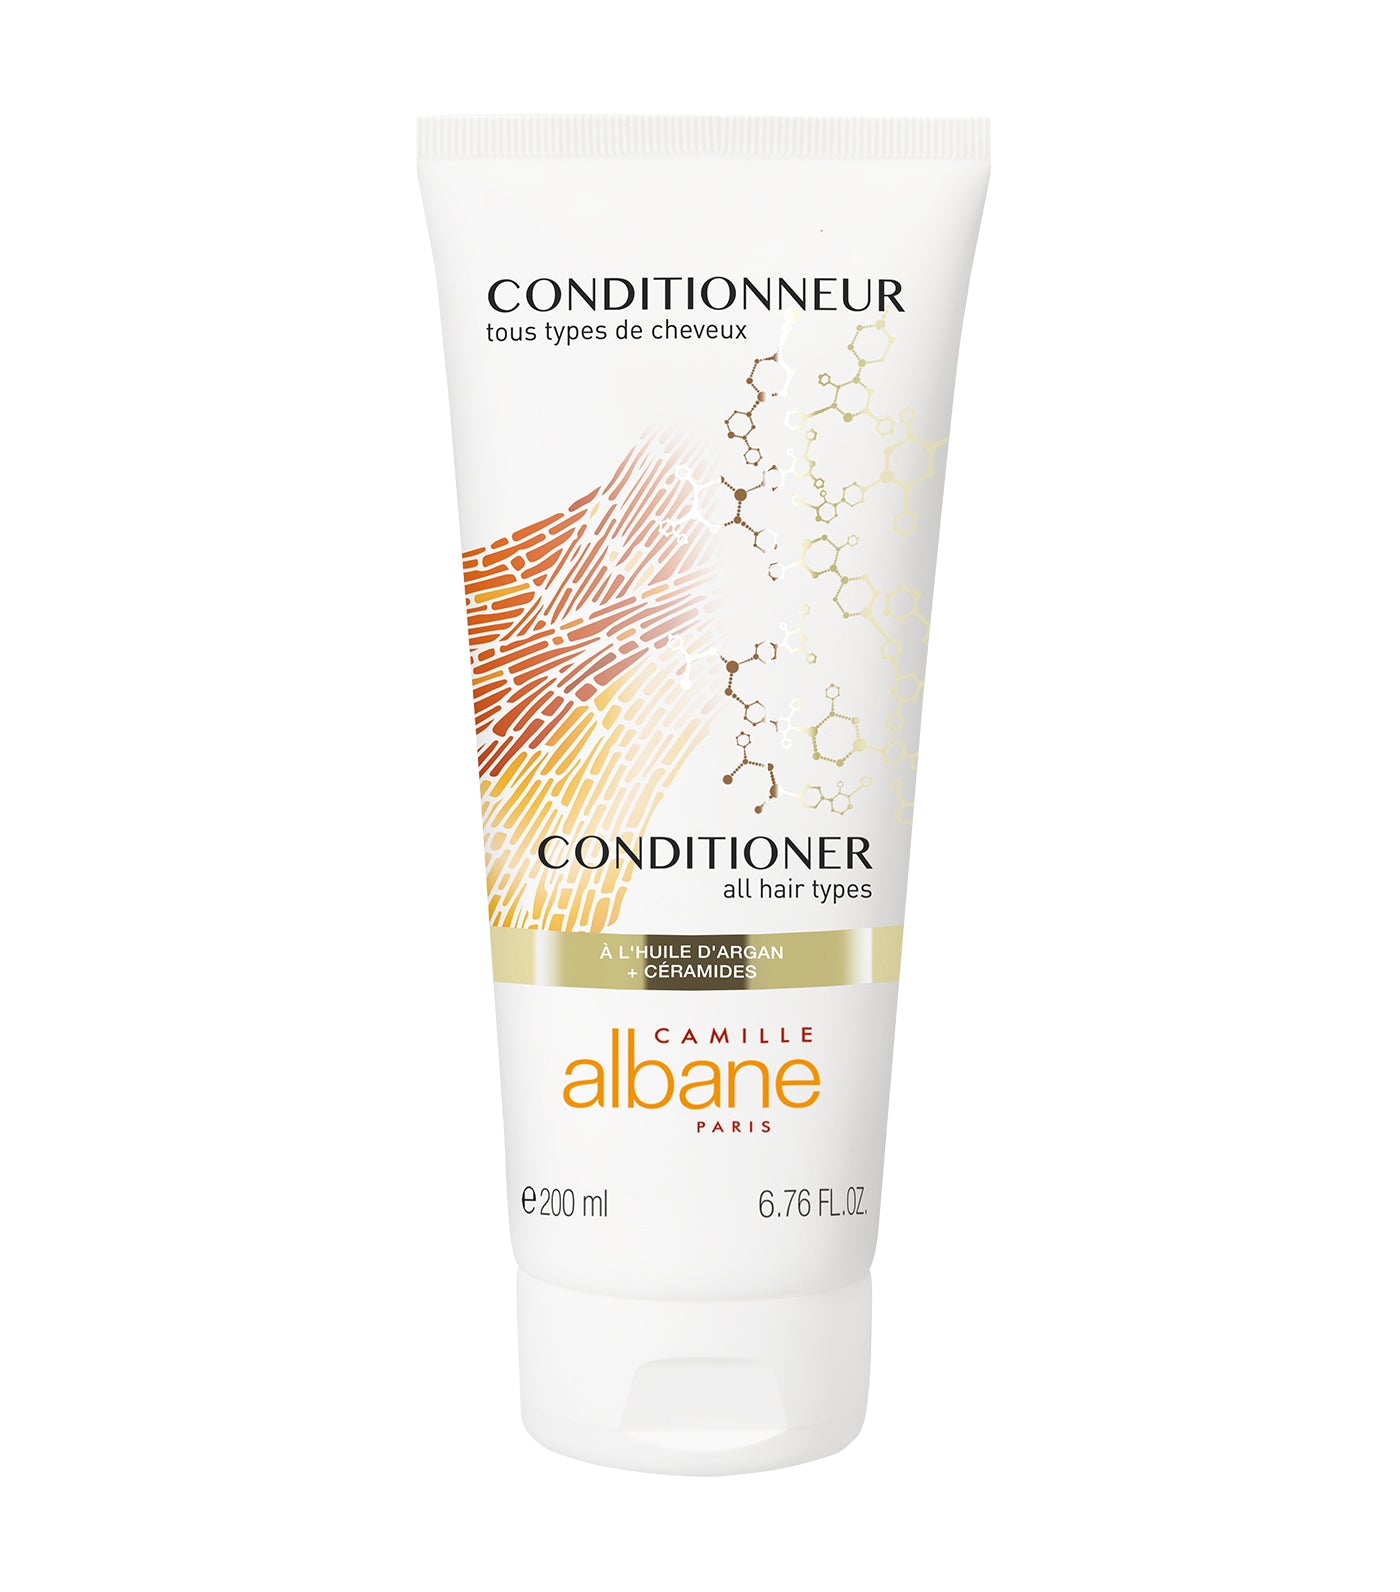 Camille Albane Paris Conditioner For All Hair Types